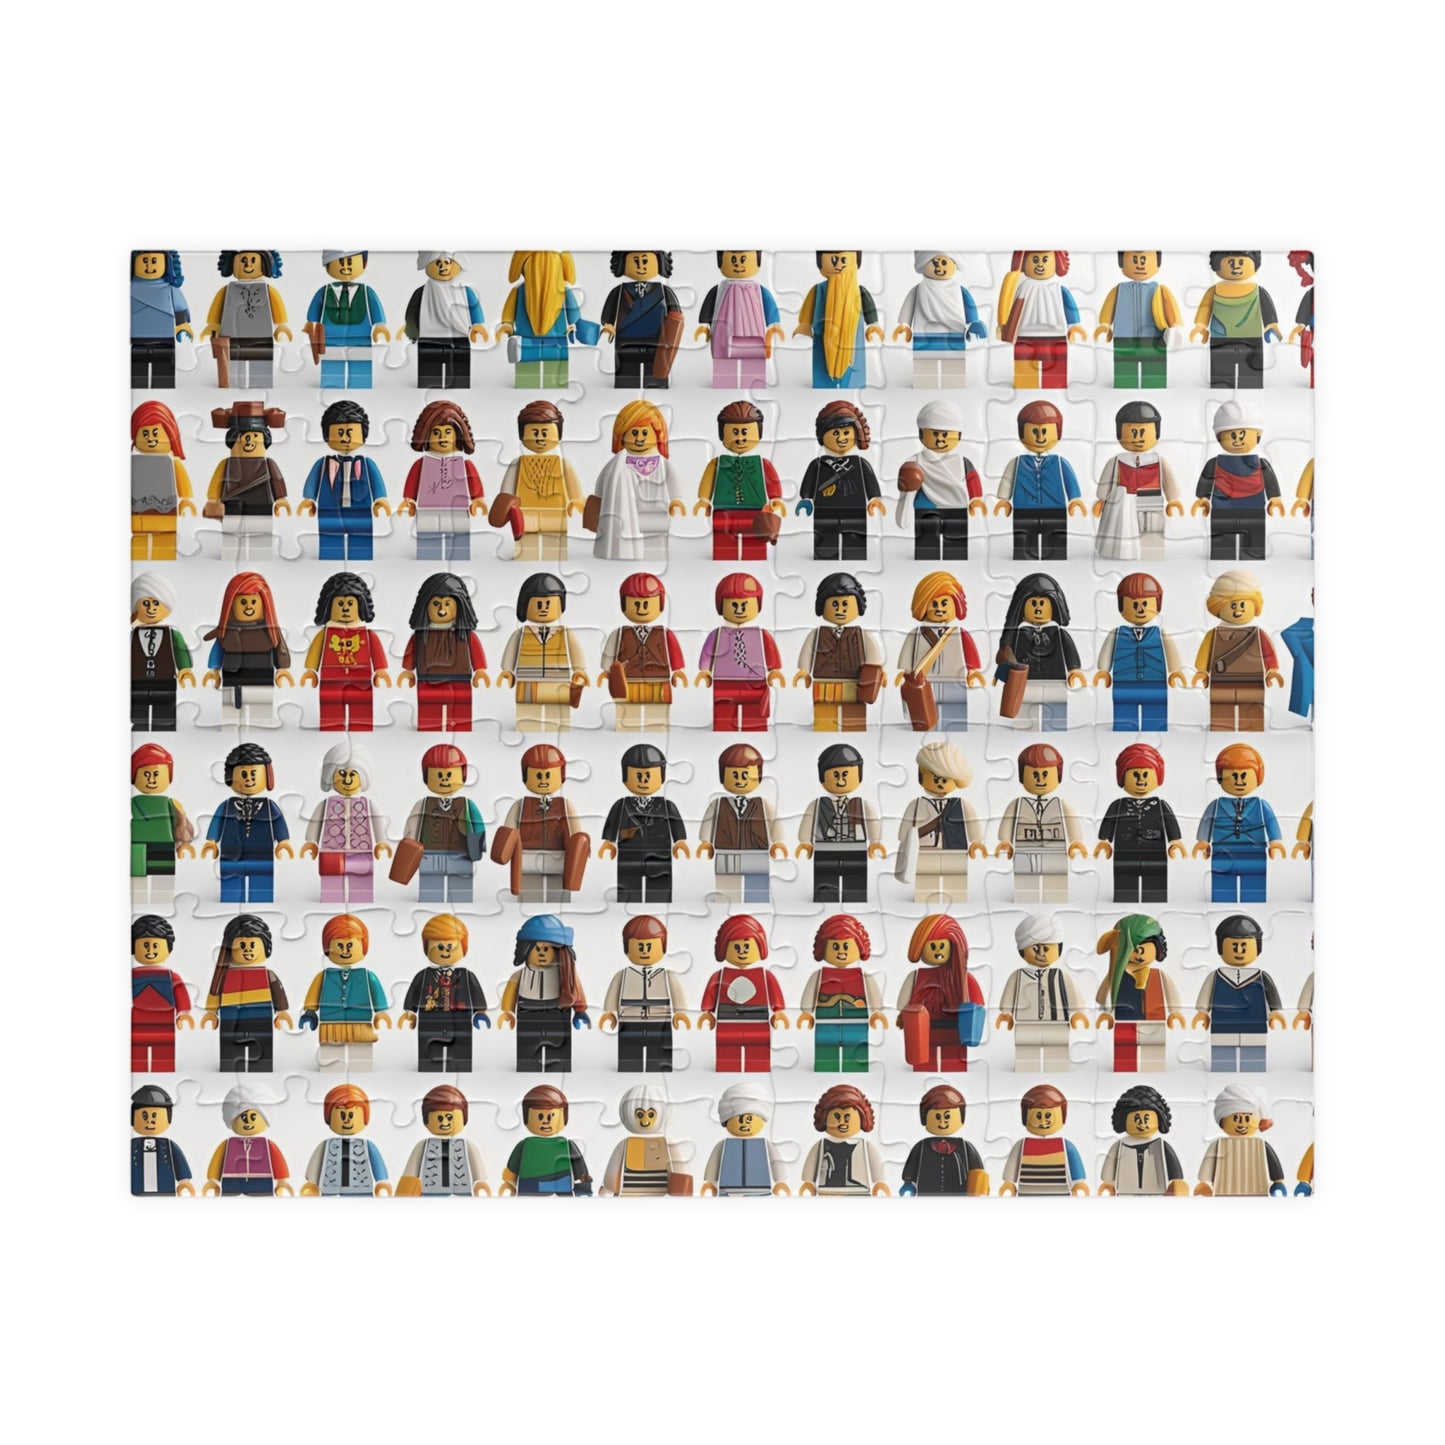 Lego Characters Puzzle (110, 252, 500, 1014-piece)